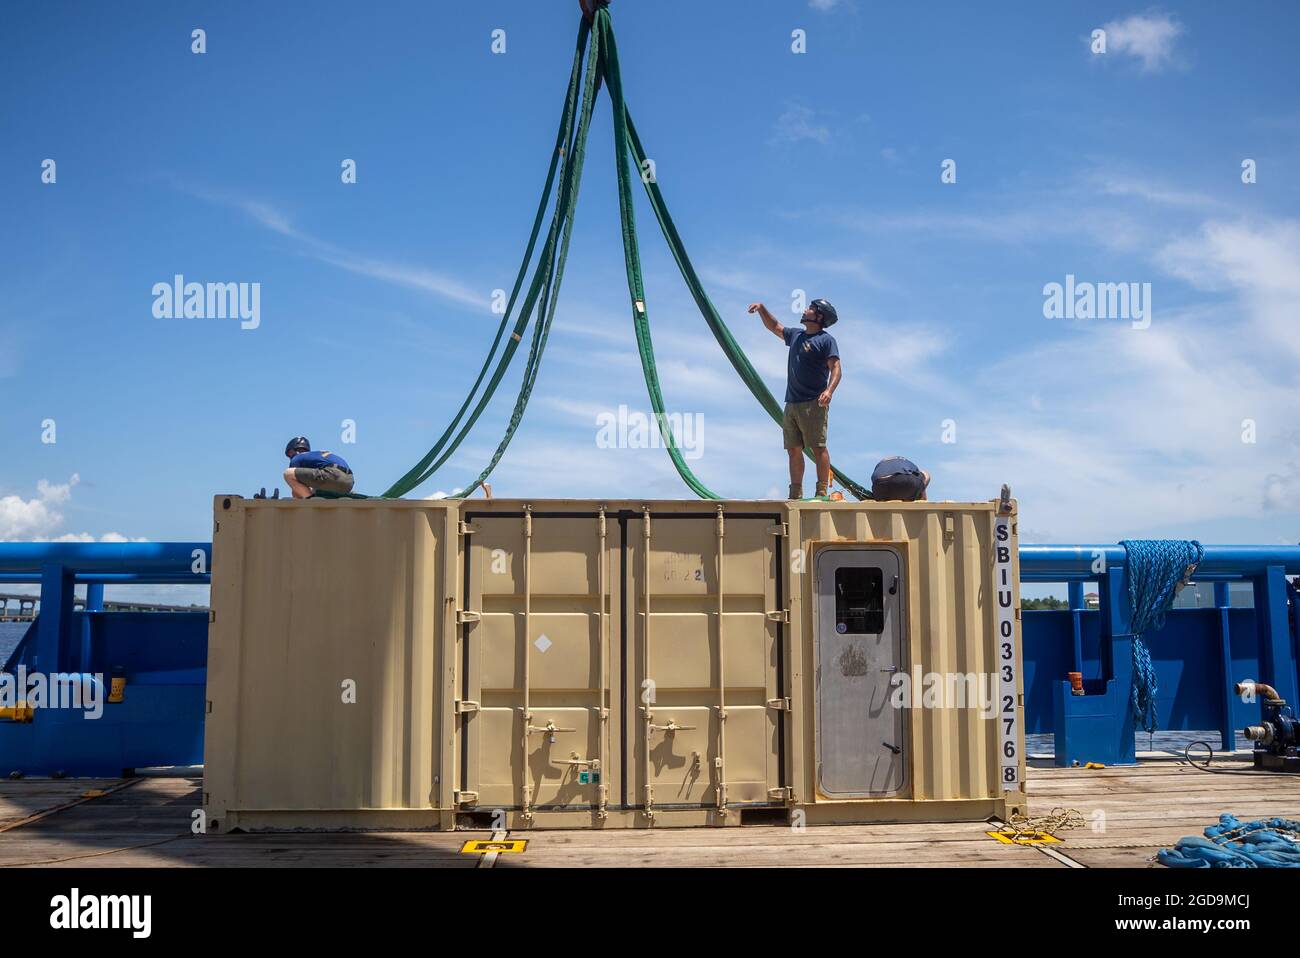 Sailors, assigned to Mobile Diving Salvage Unit (MDSU) 2, load a transportable recompression chamber system (TRCS) onto Ultra-Light Intervention vessel MV Connor Bordelon during Large-Scale Exercise (LSE 2021). LSE 2021 demonstrates the Navy’s ability to employ precise, lethal, and overwhelming force globally across three naval component commands, five numbered fleets, and 17 time zones. LSE 2021 merges live and synthetic training capabilities to create an intense, robust training environment. It will connect high-fidelity training and real-world operations, to build knowledge and skills neede Stock Photo